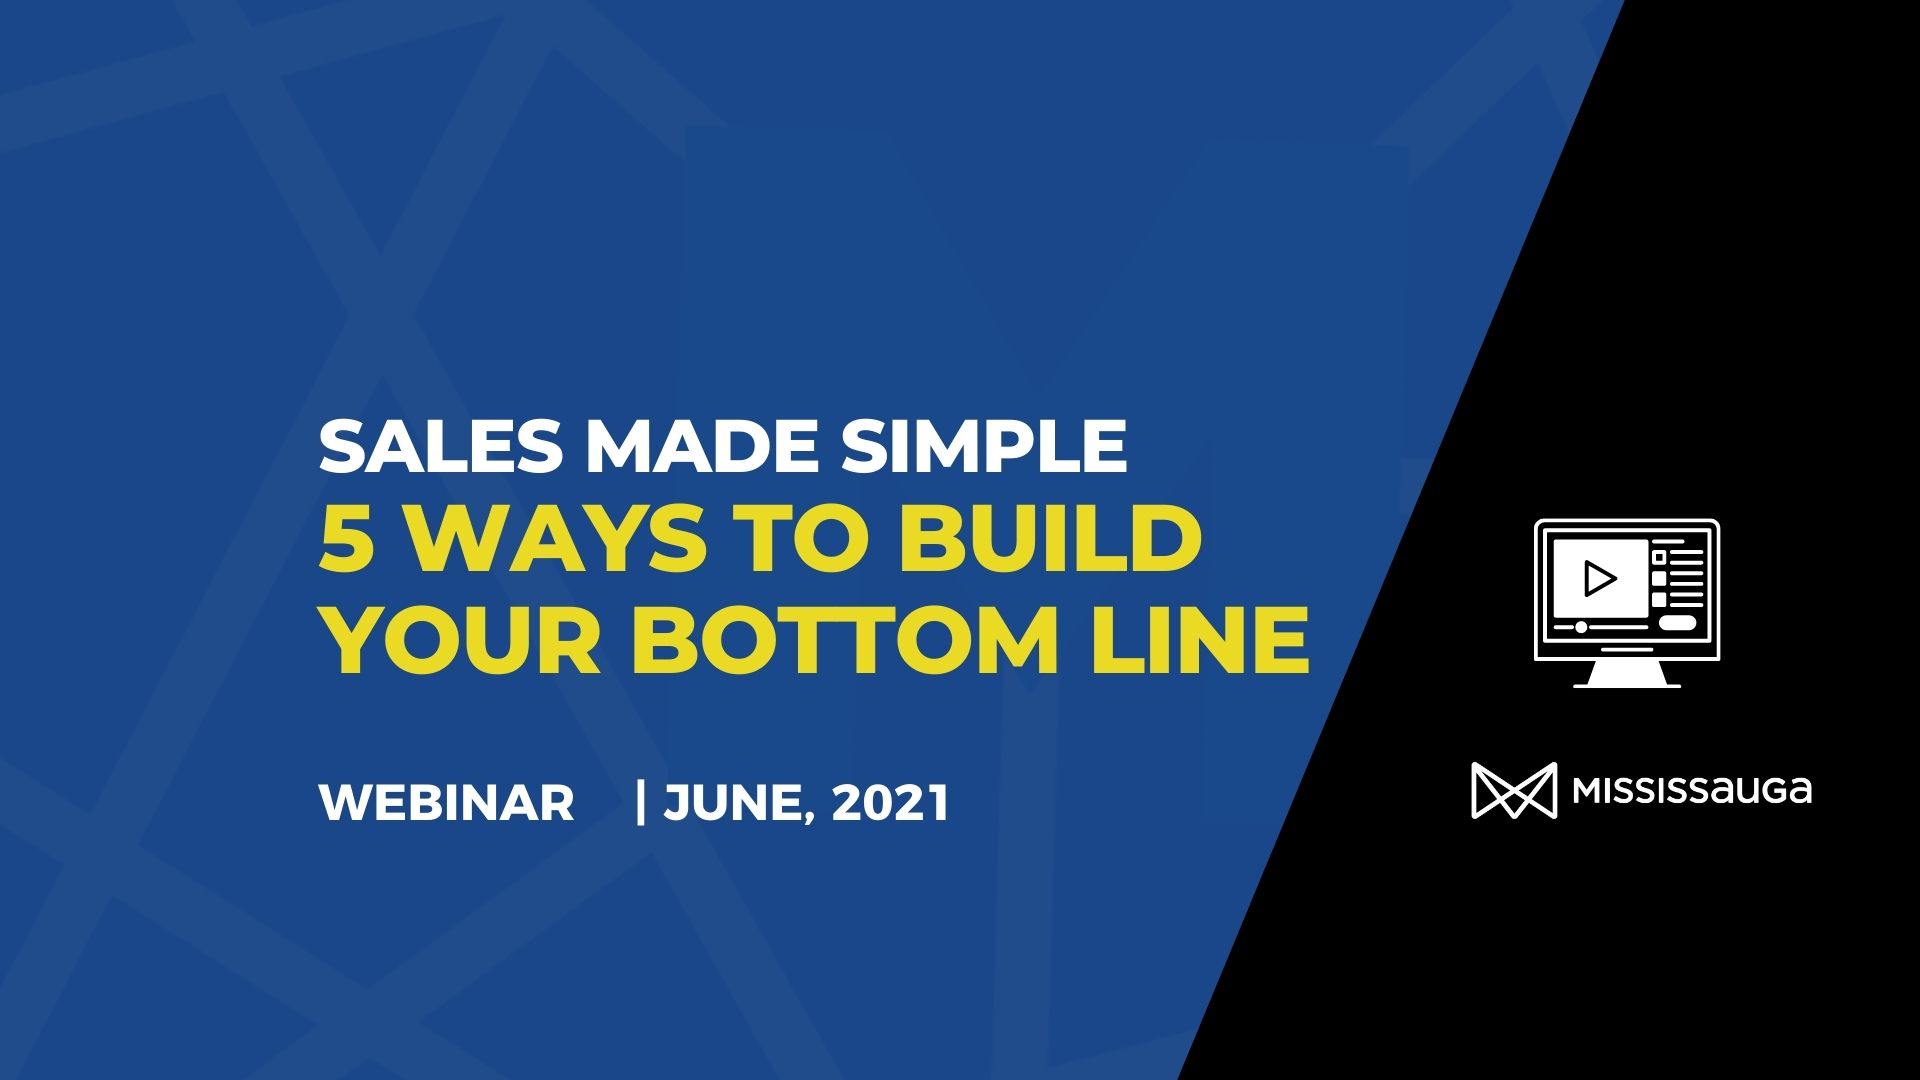 Sales Made Simple, 5 Ways to Build your Bottom Line – Webinar, June 30